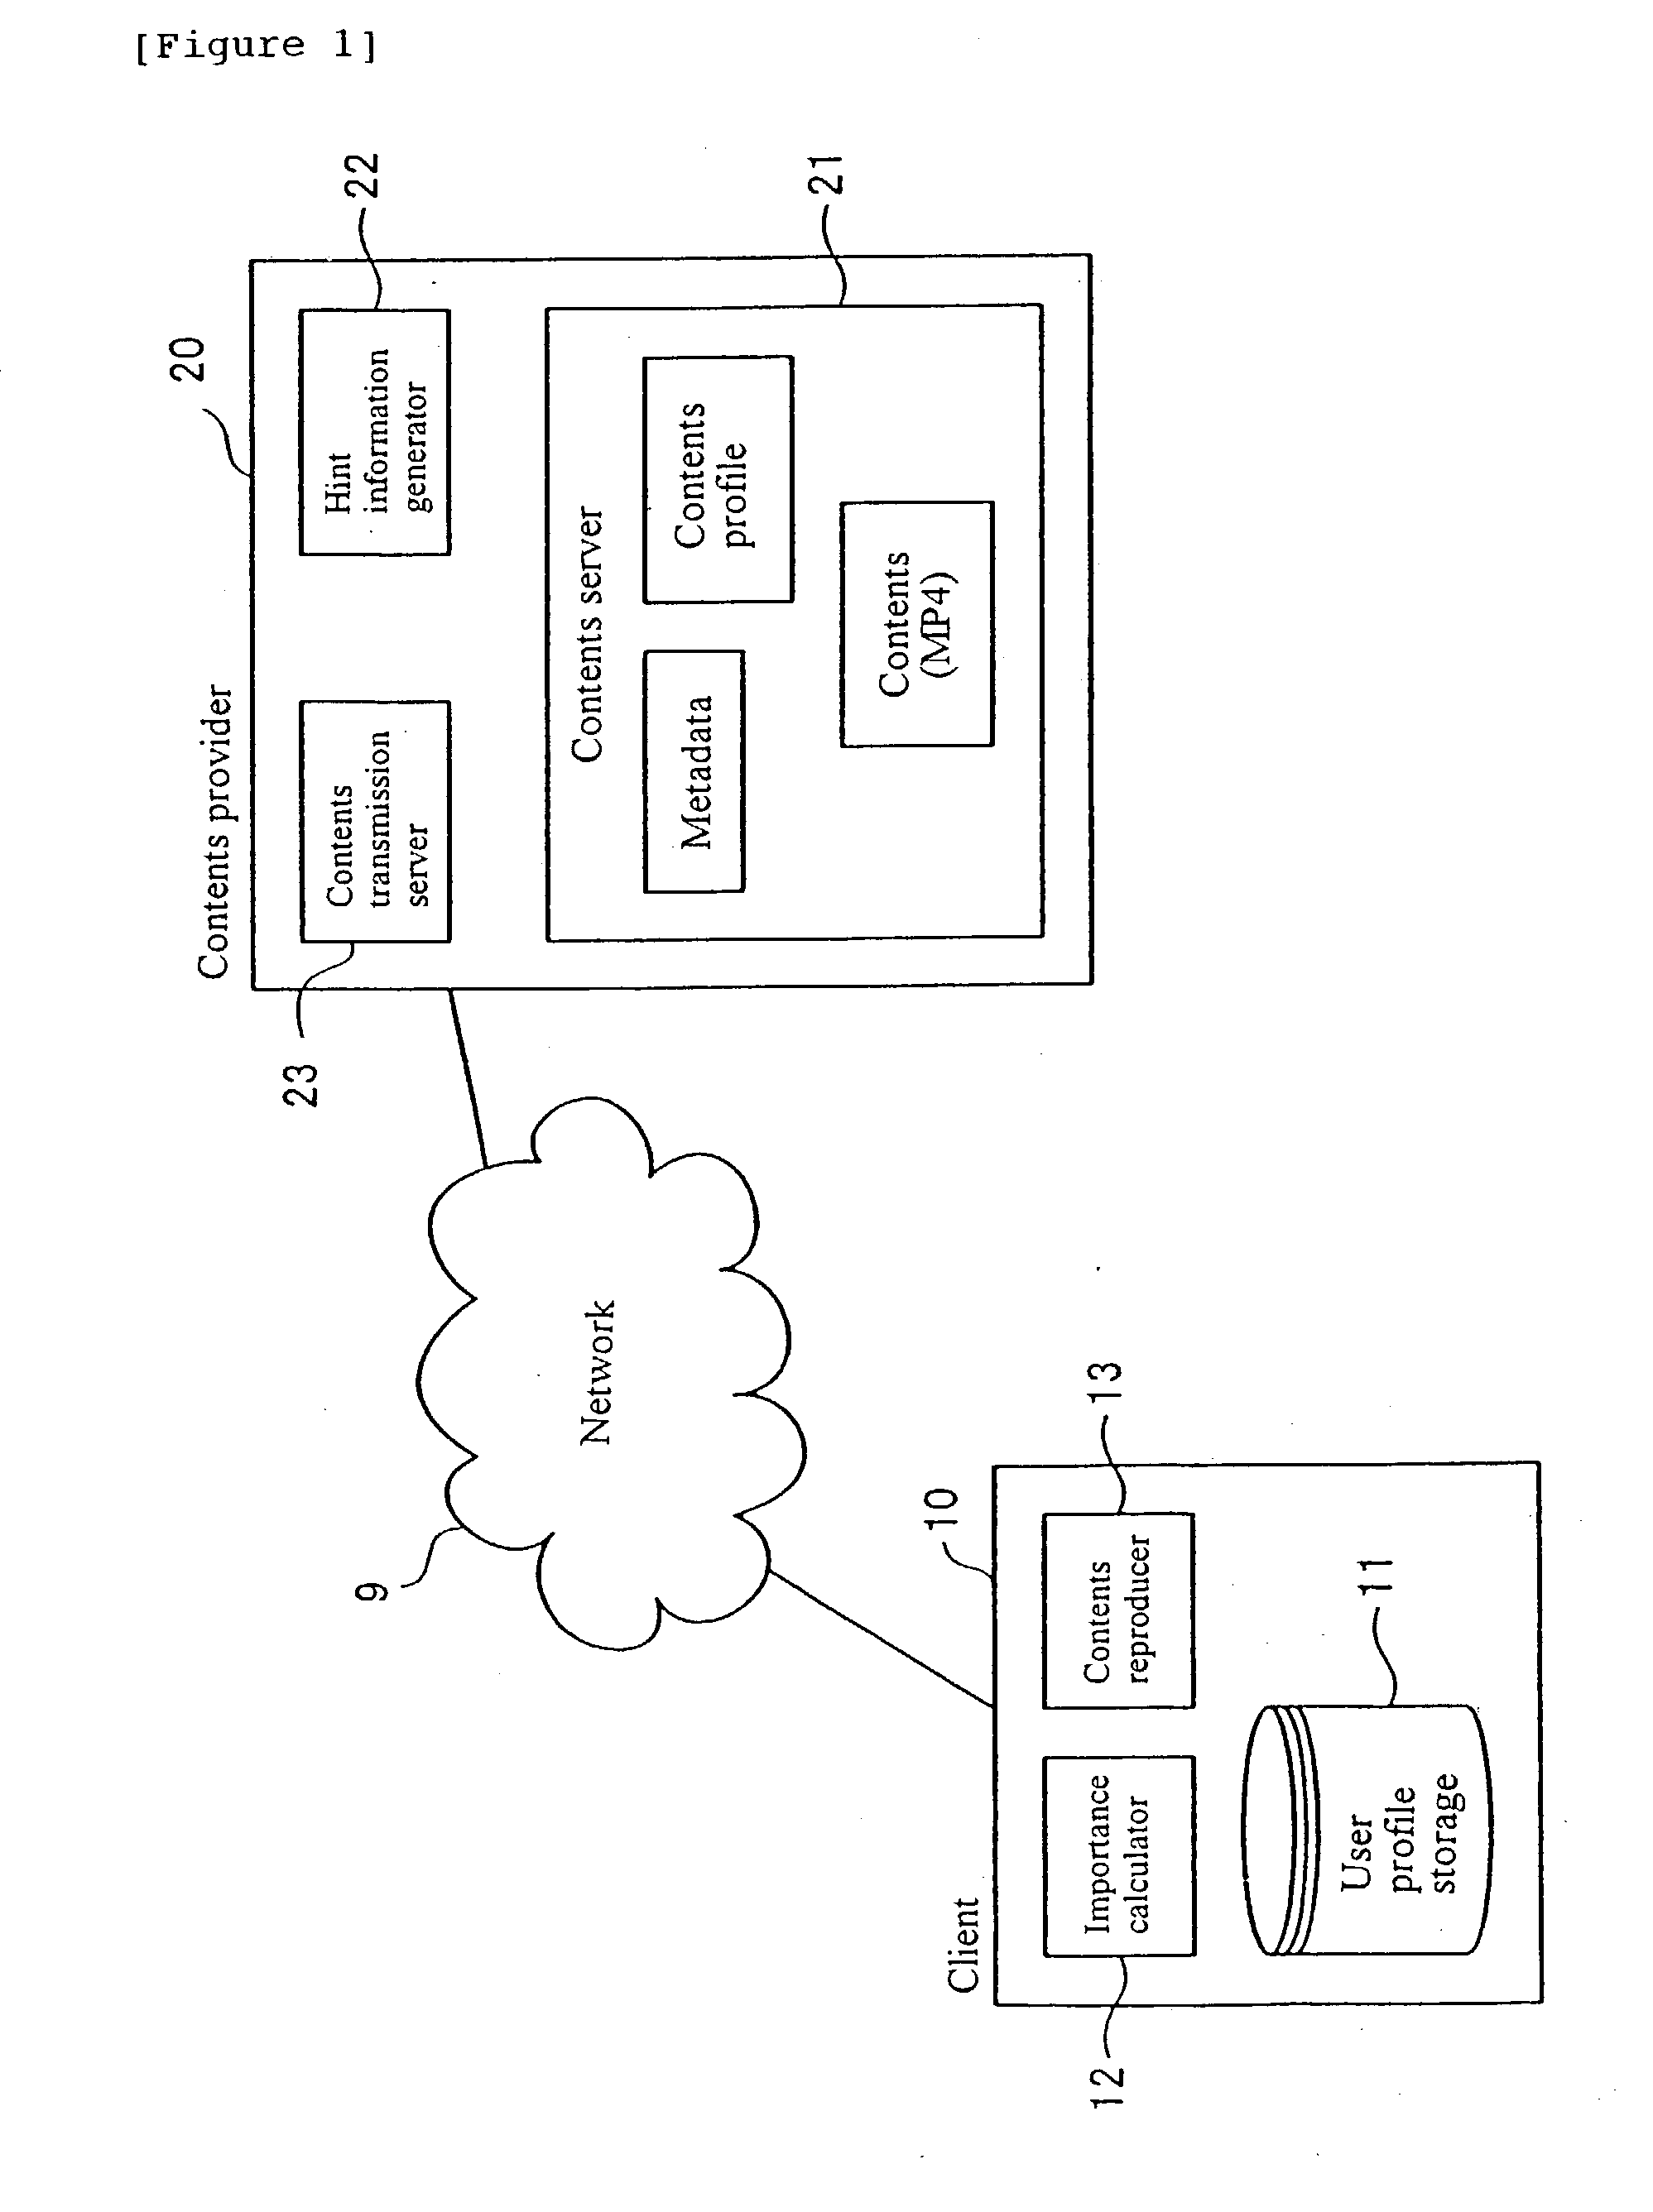 Content provisioning system and method